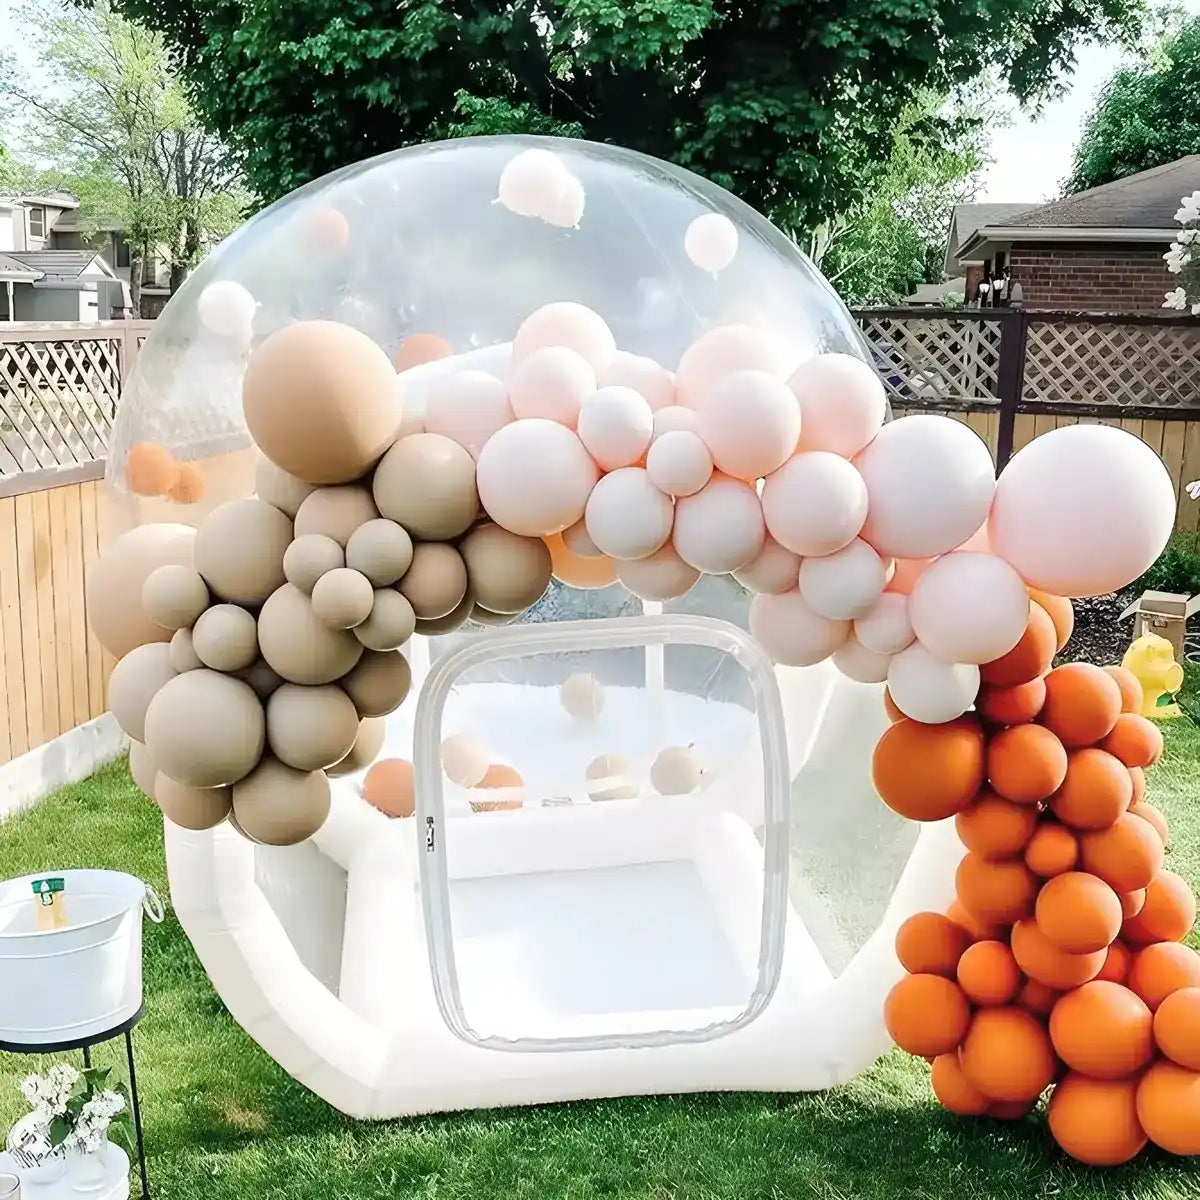 Inflatable bubble house decorated with balloons in backyard